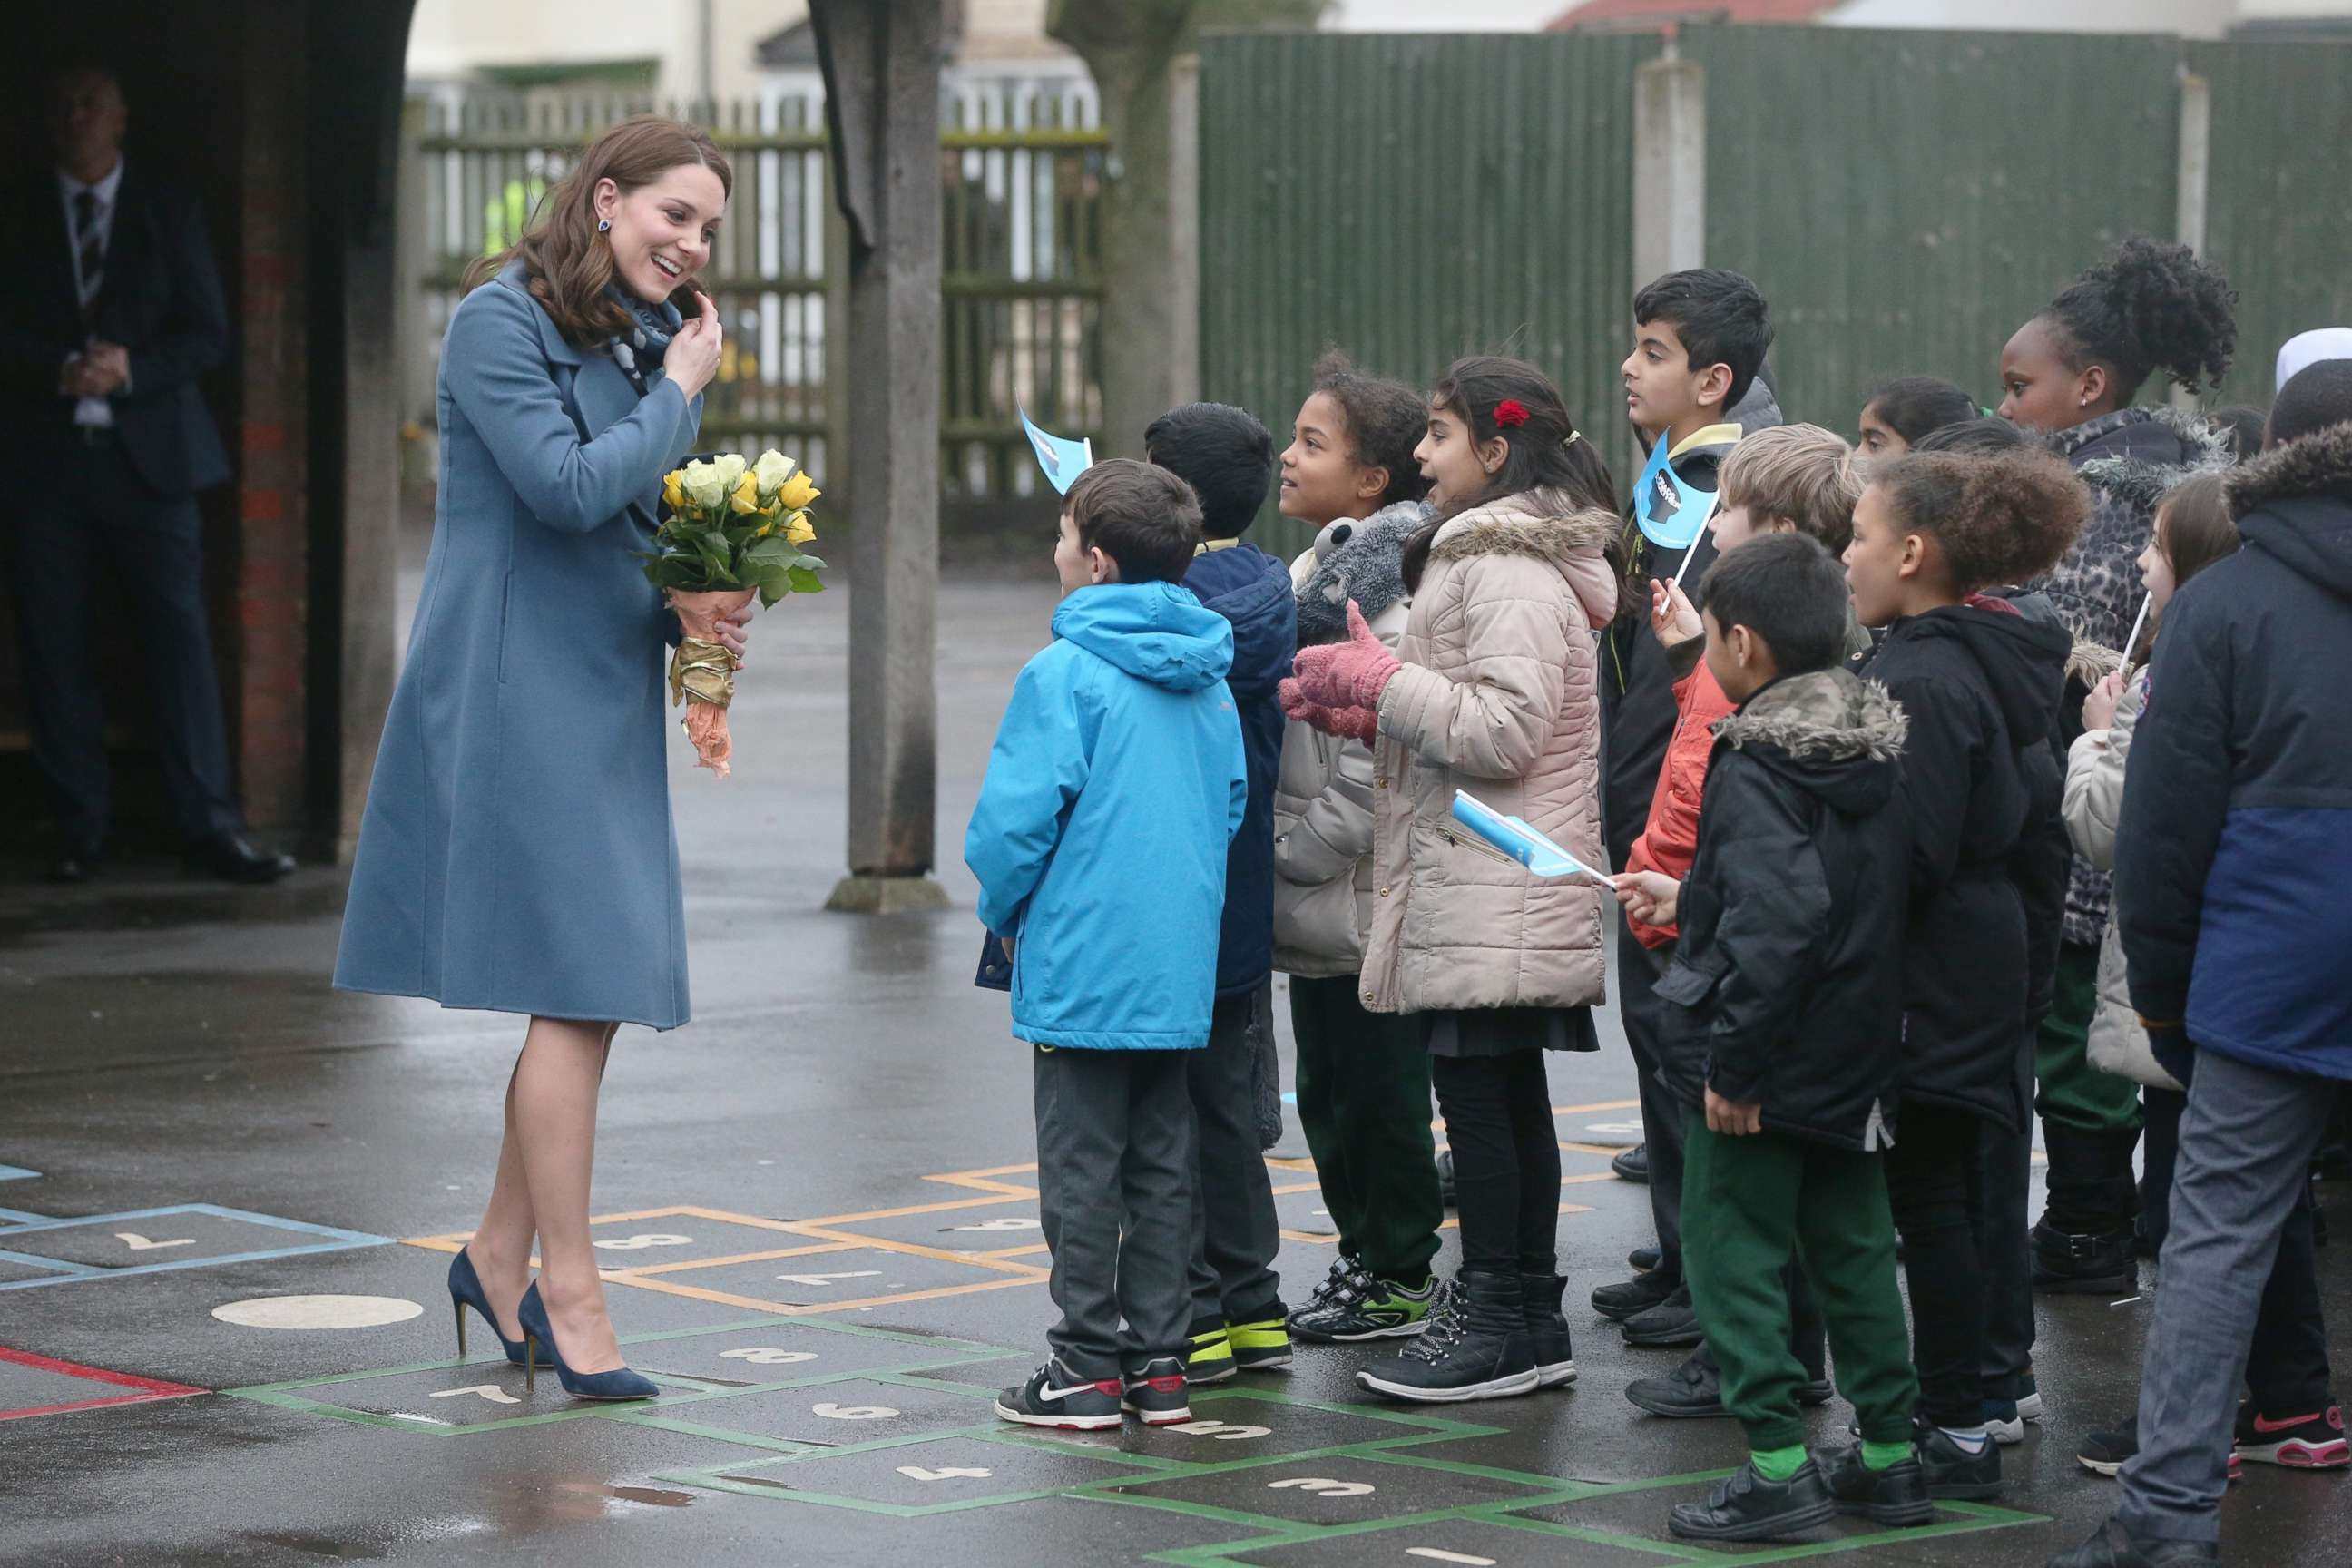 PHOTO: The Duchess of Cambridge greets children as she arrives at Roe Green Junior School where she will launch a mental health program for schools, Jan. 23, 2018, in Brent, London.